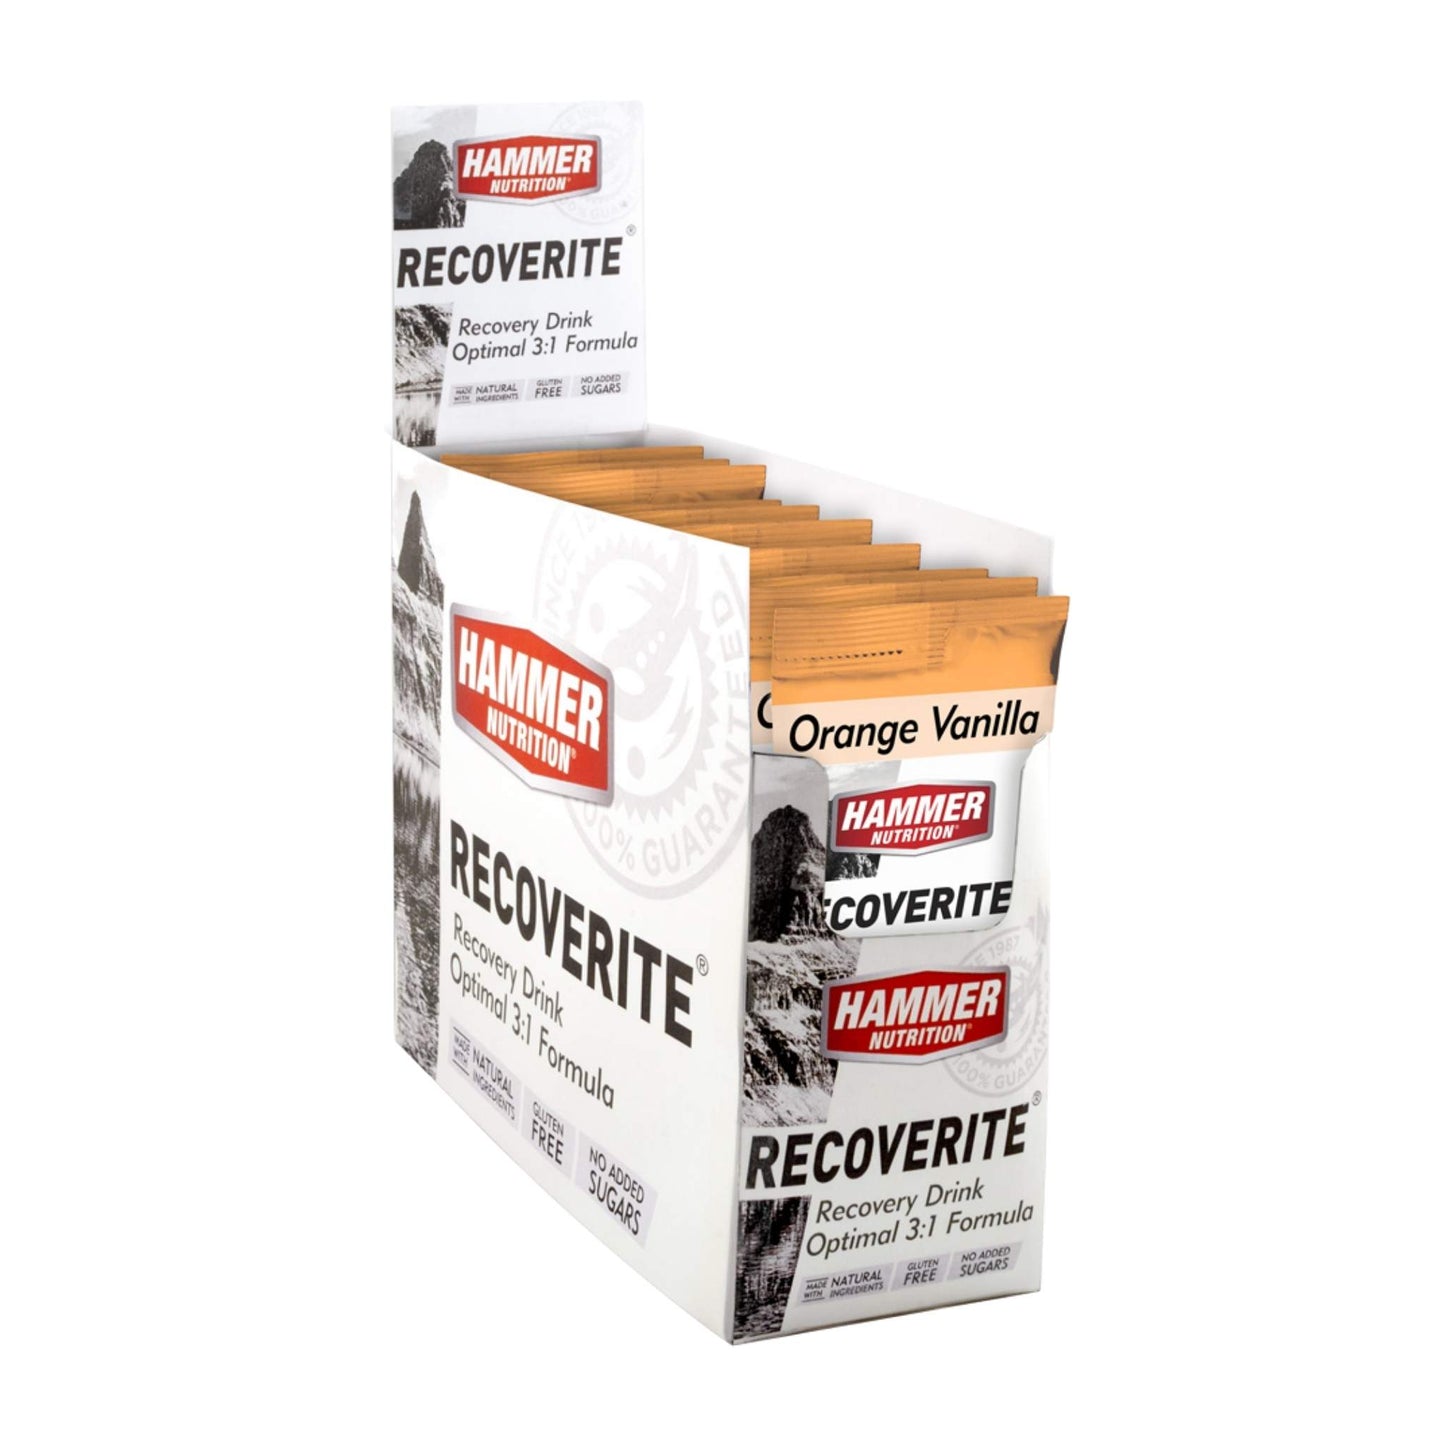 Hammer Nutrition - Recoverite, Orange Vanilla, Box of 12 Servings, Shown in Packaging, Team Perfect